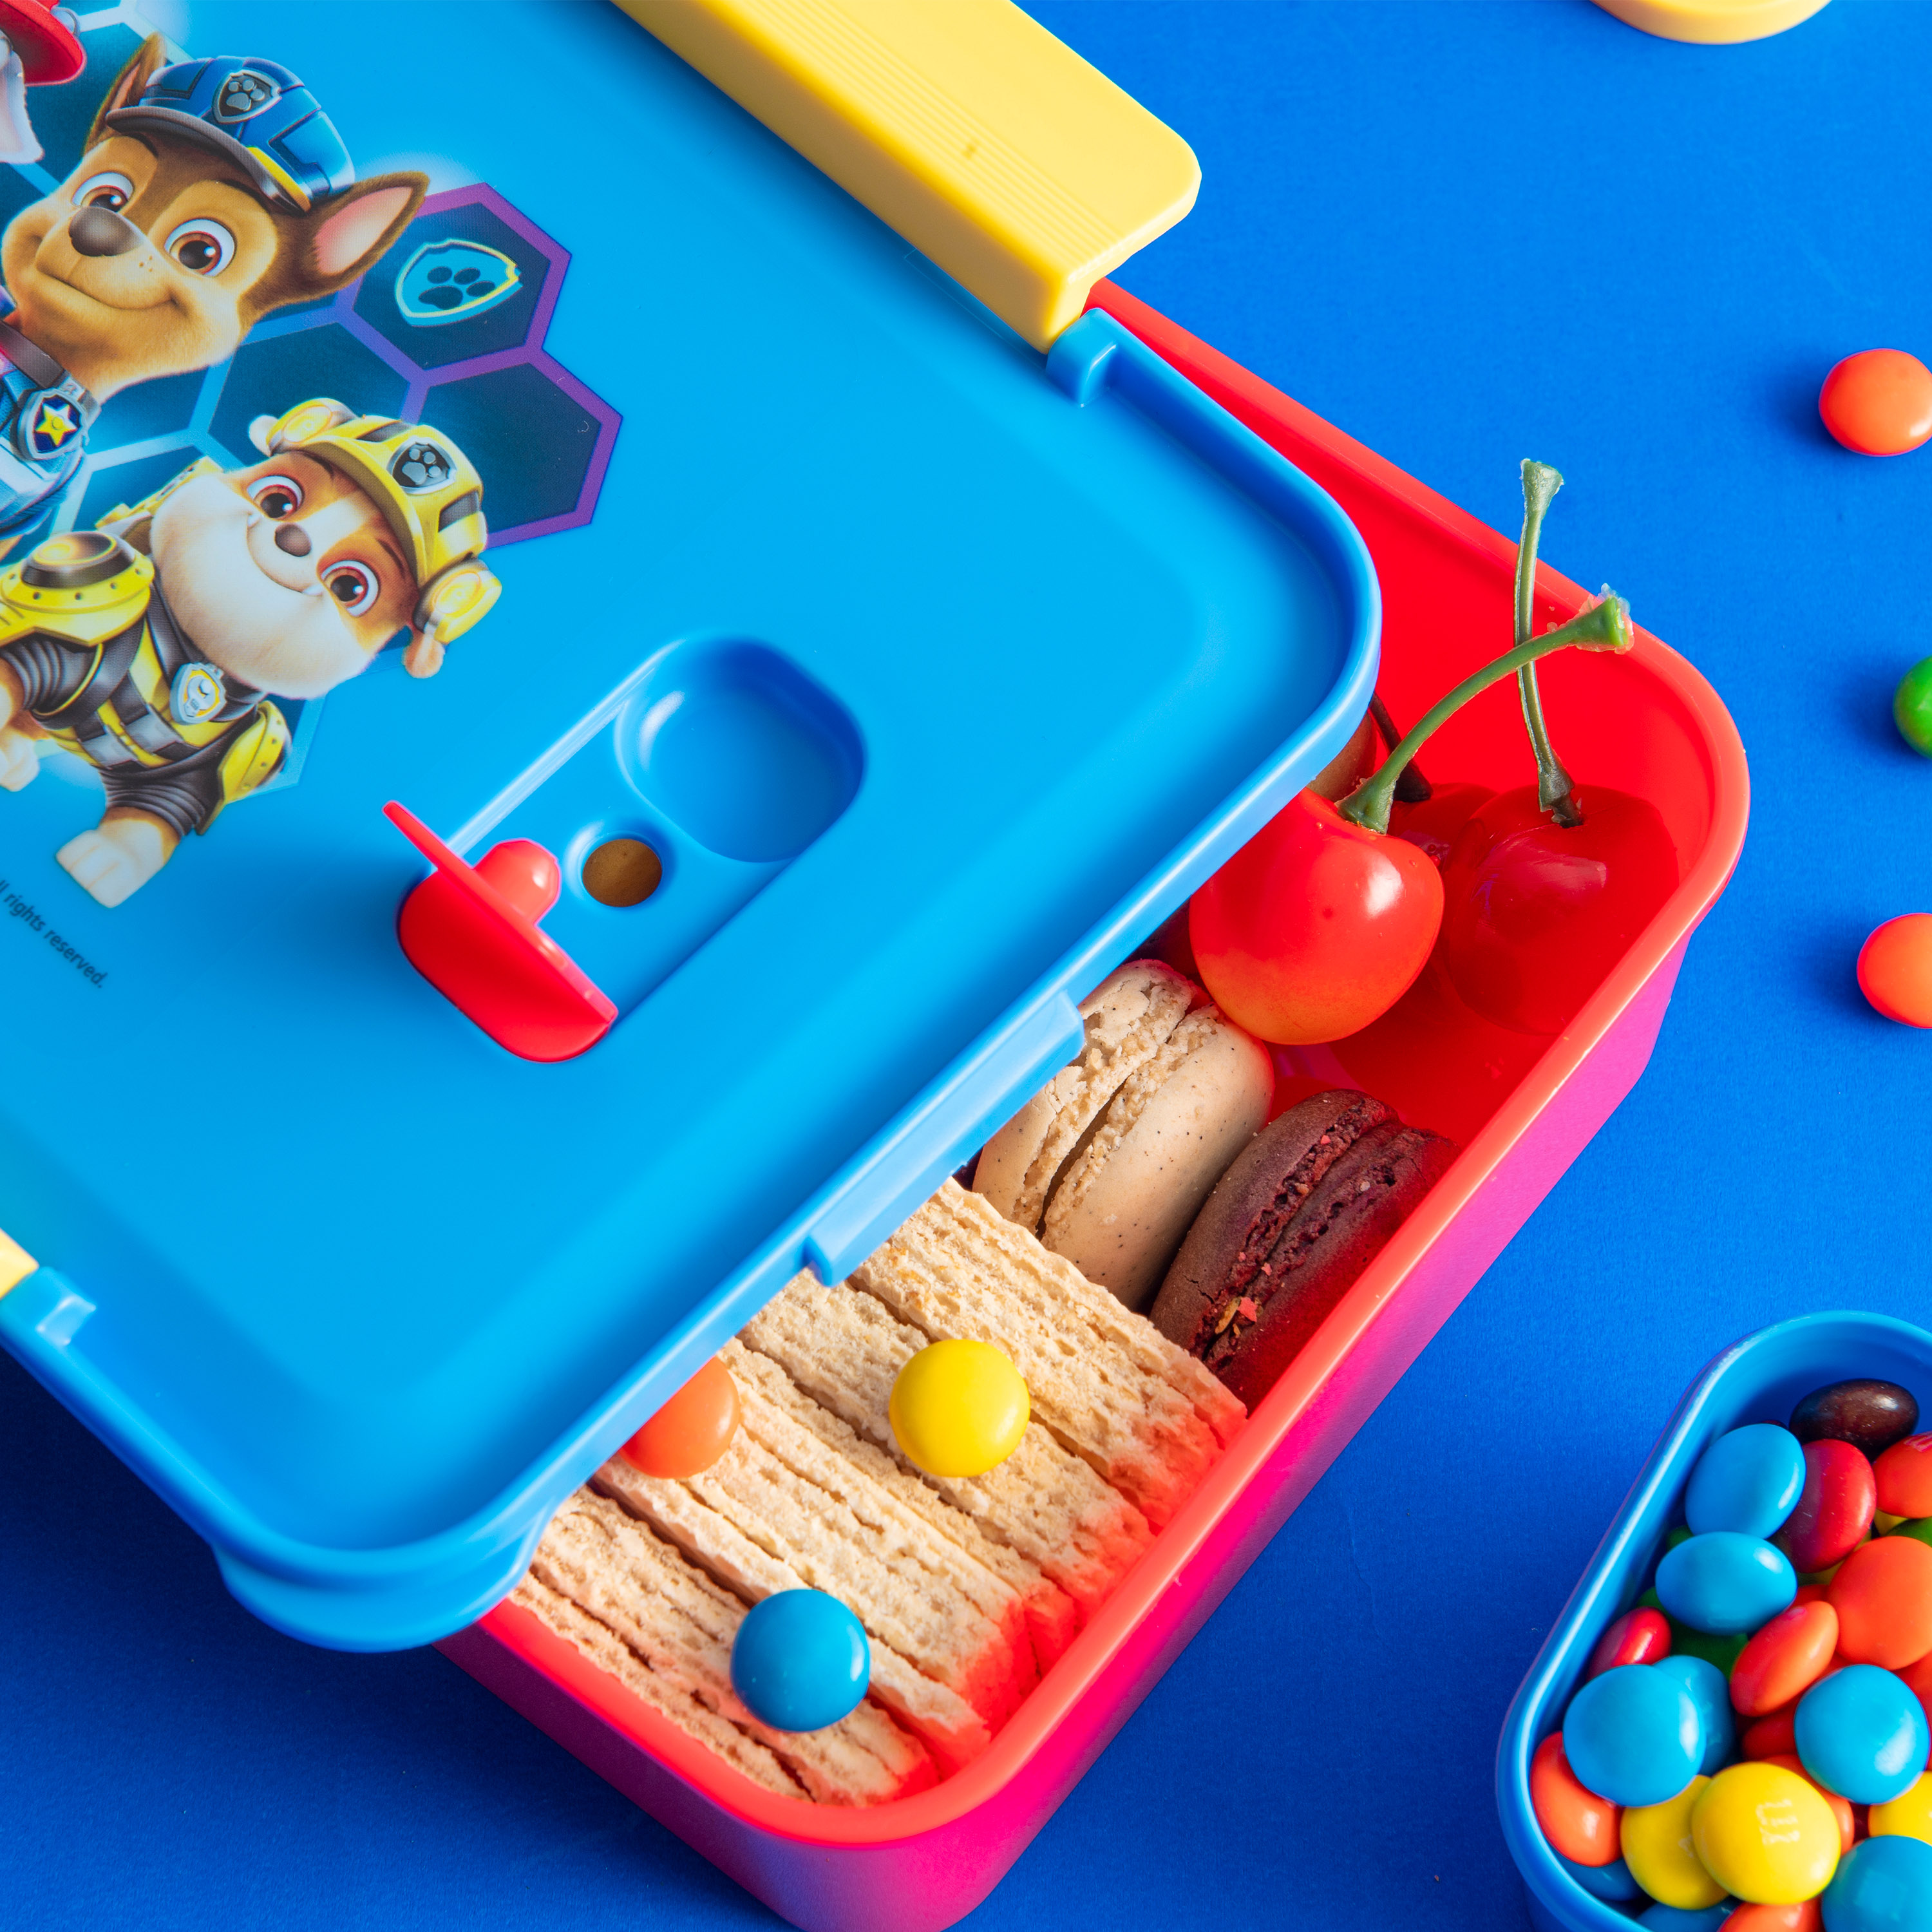 Paw Patrol Movie Reusable Divided Bento Box, Rubble, Marshall and Chase, 3-piece set slideshow image 6